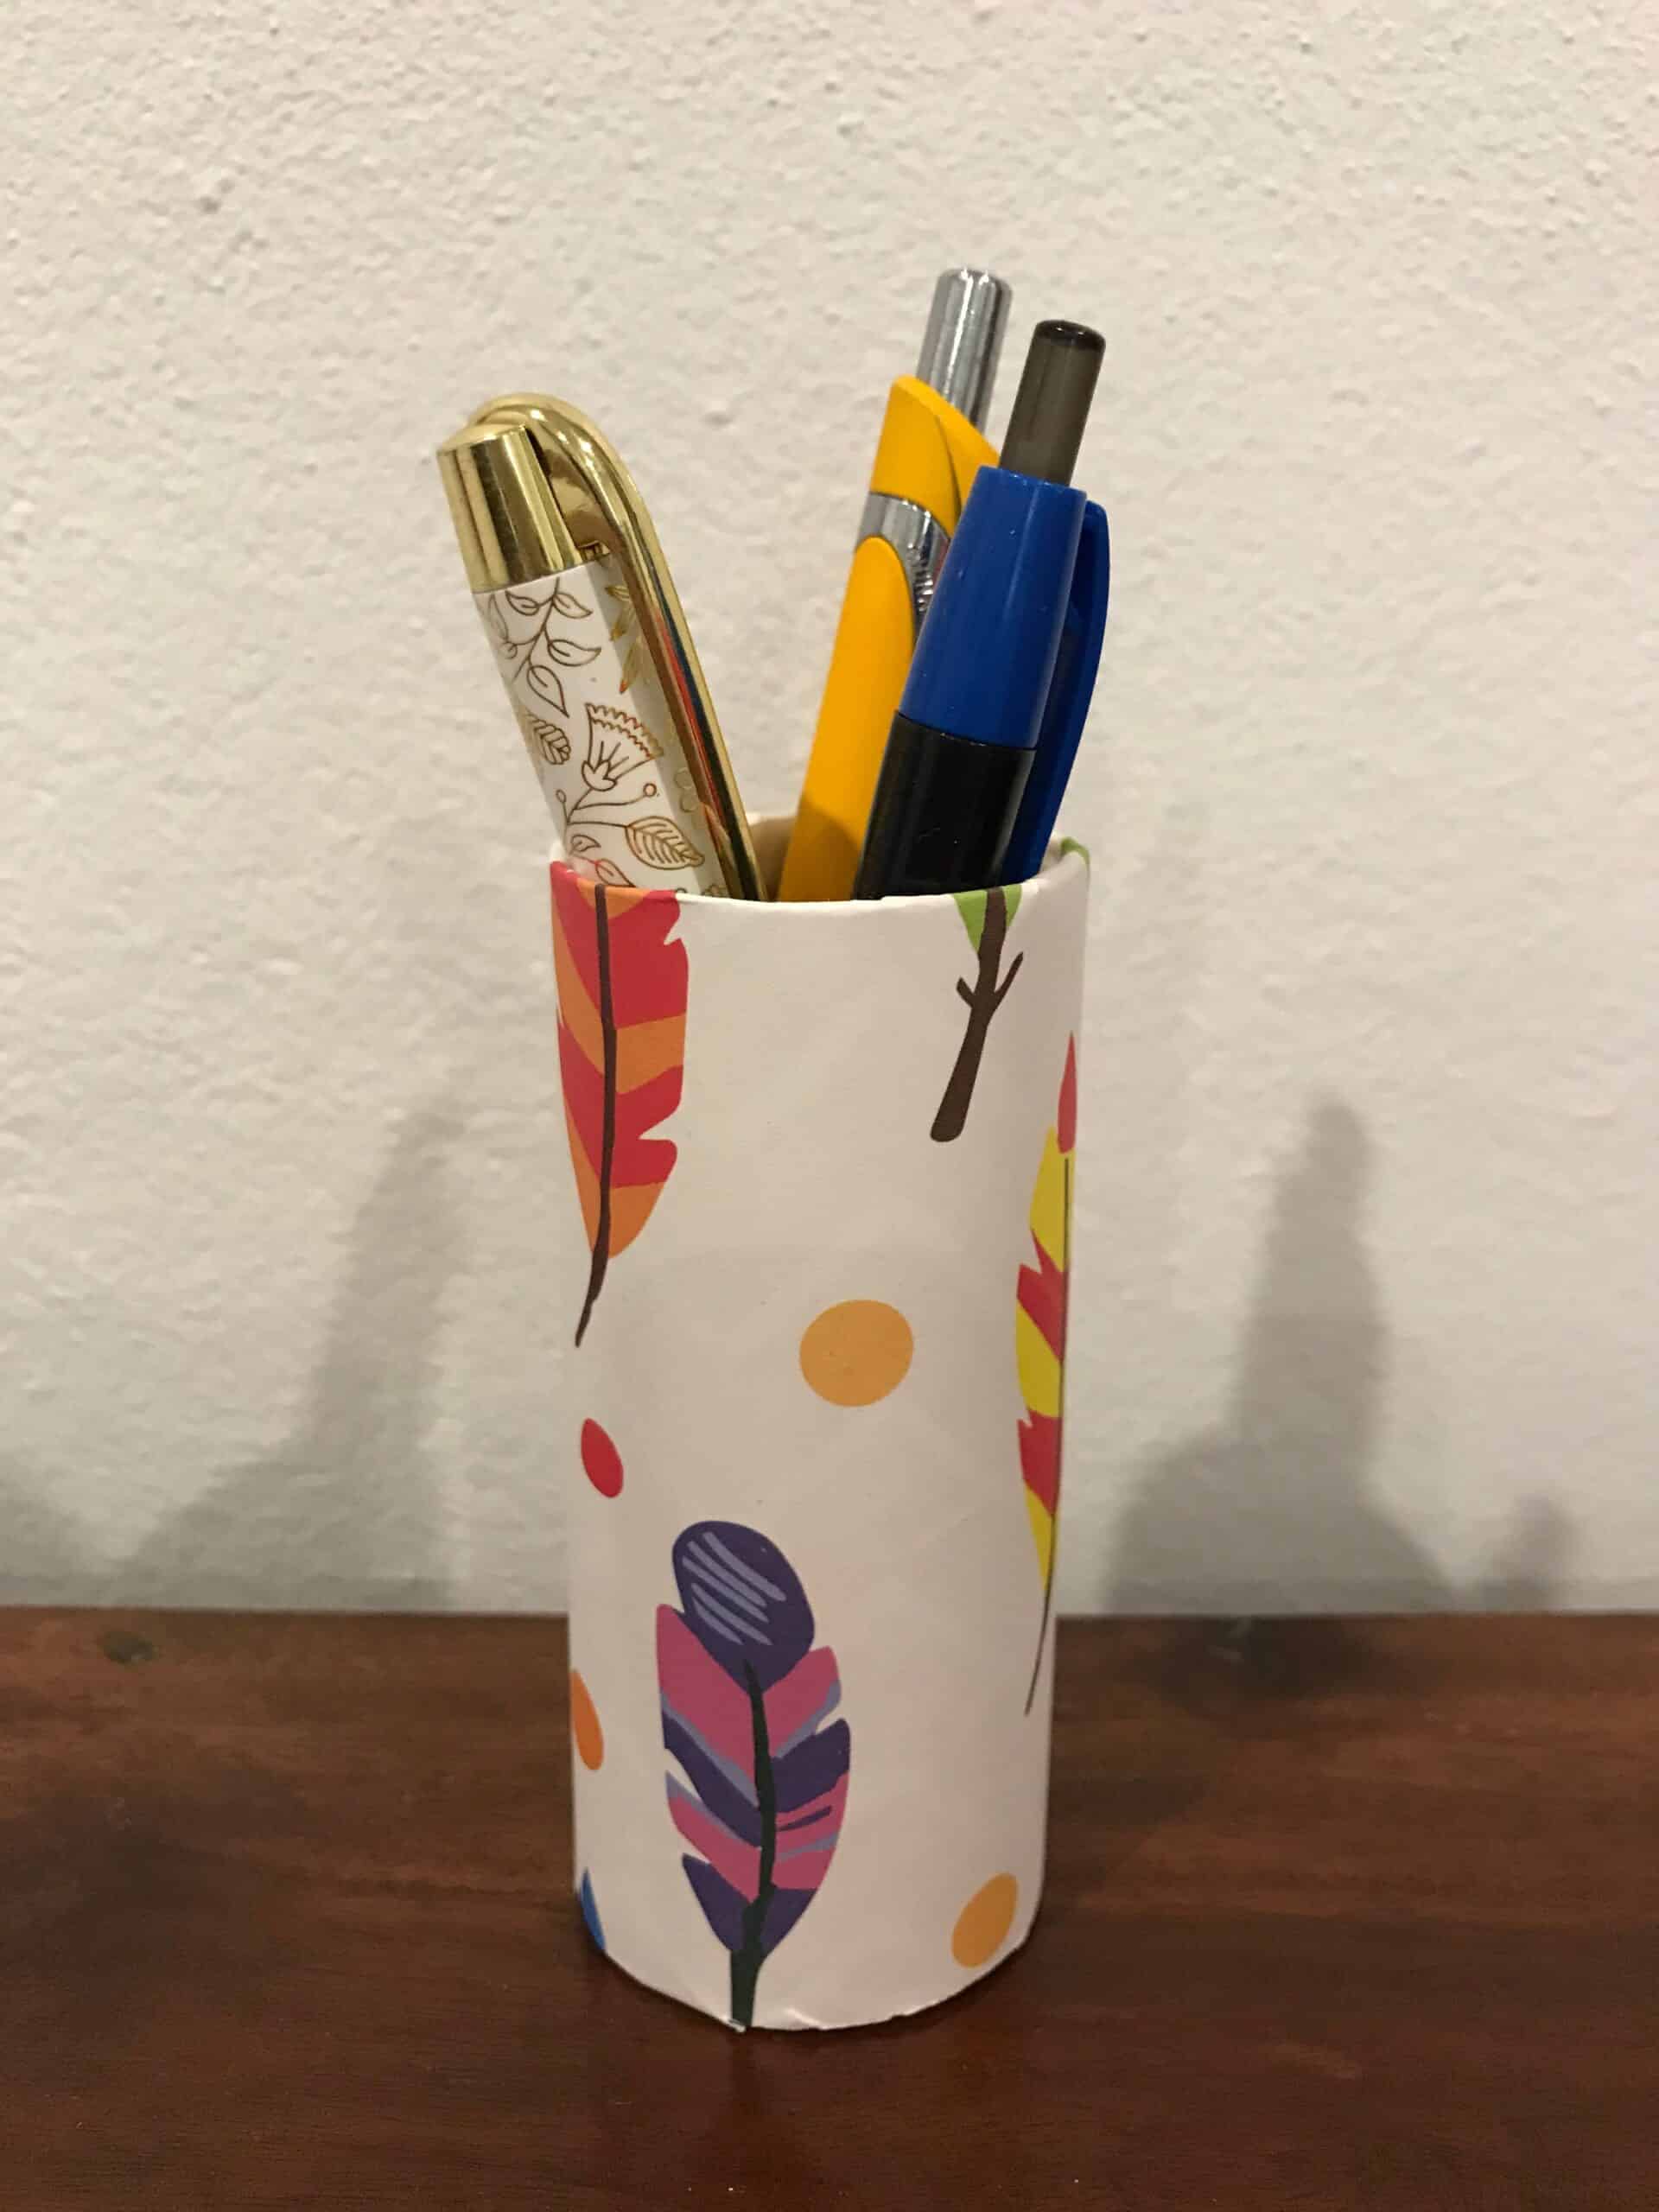 pens cheaply organized on a desk using toilet roll holder